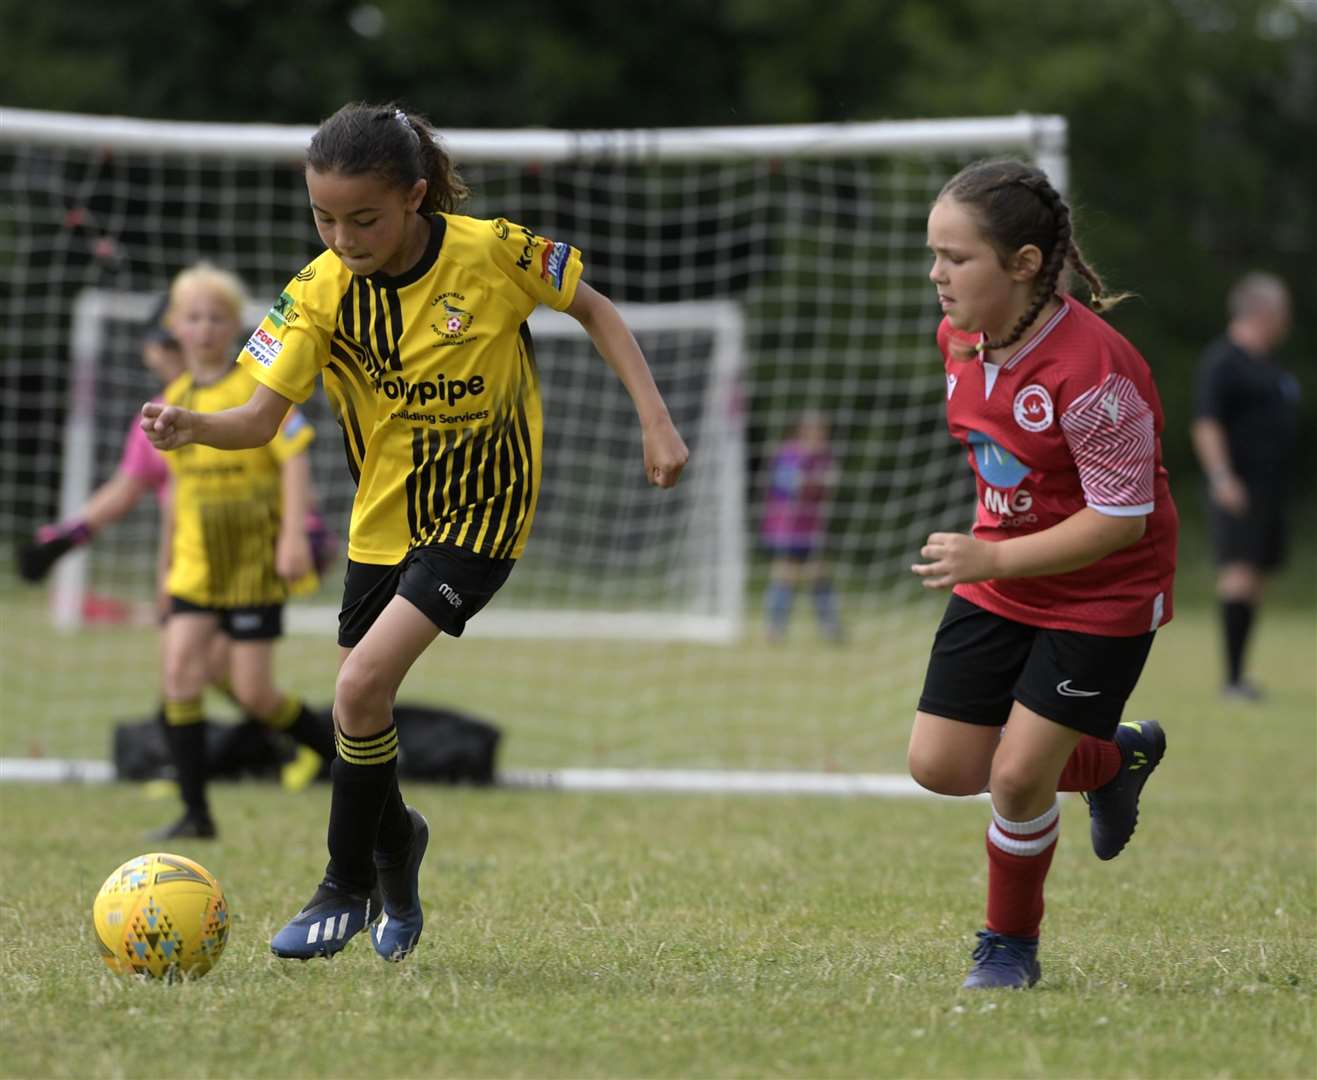 Larkfield under-9s (yellow) in action at their home tournament against Staplehurst Monarchs. Picture: Barry Goodwin